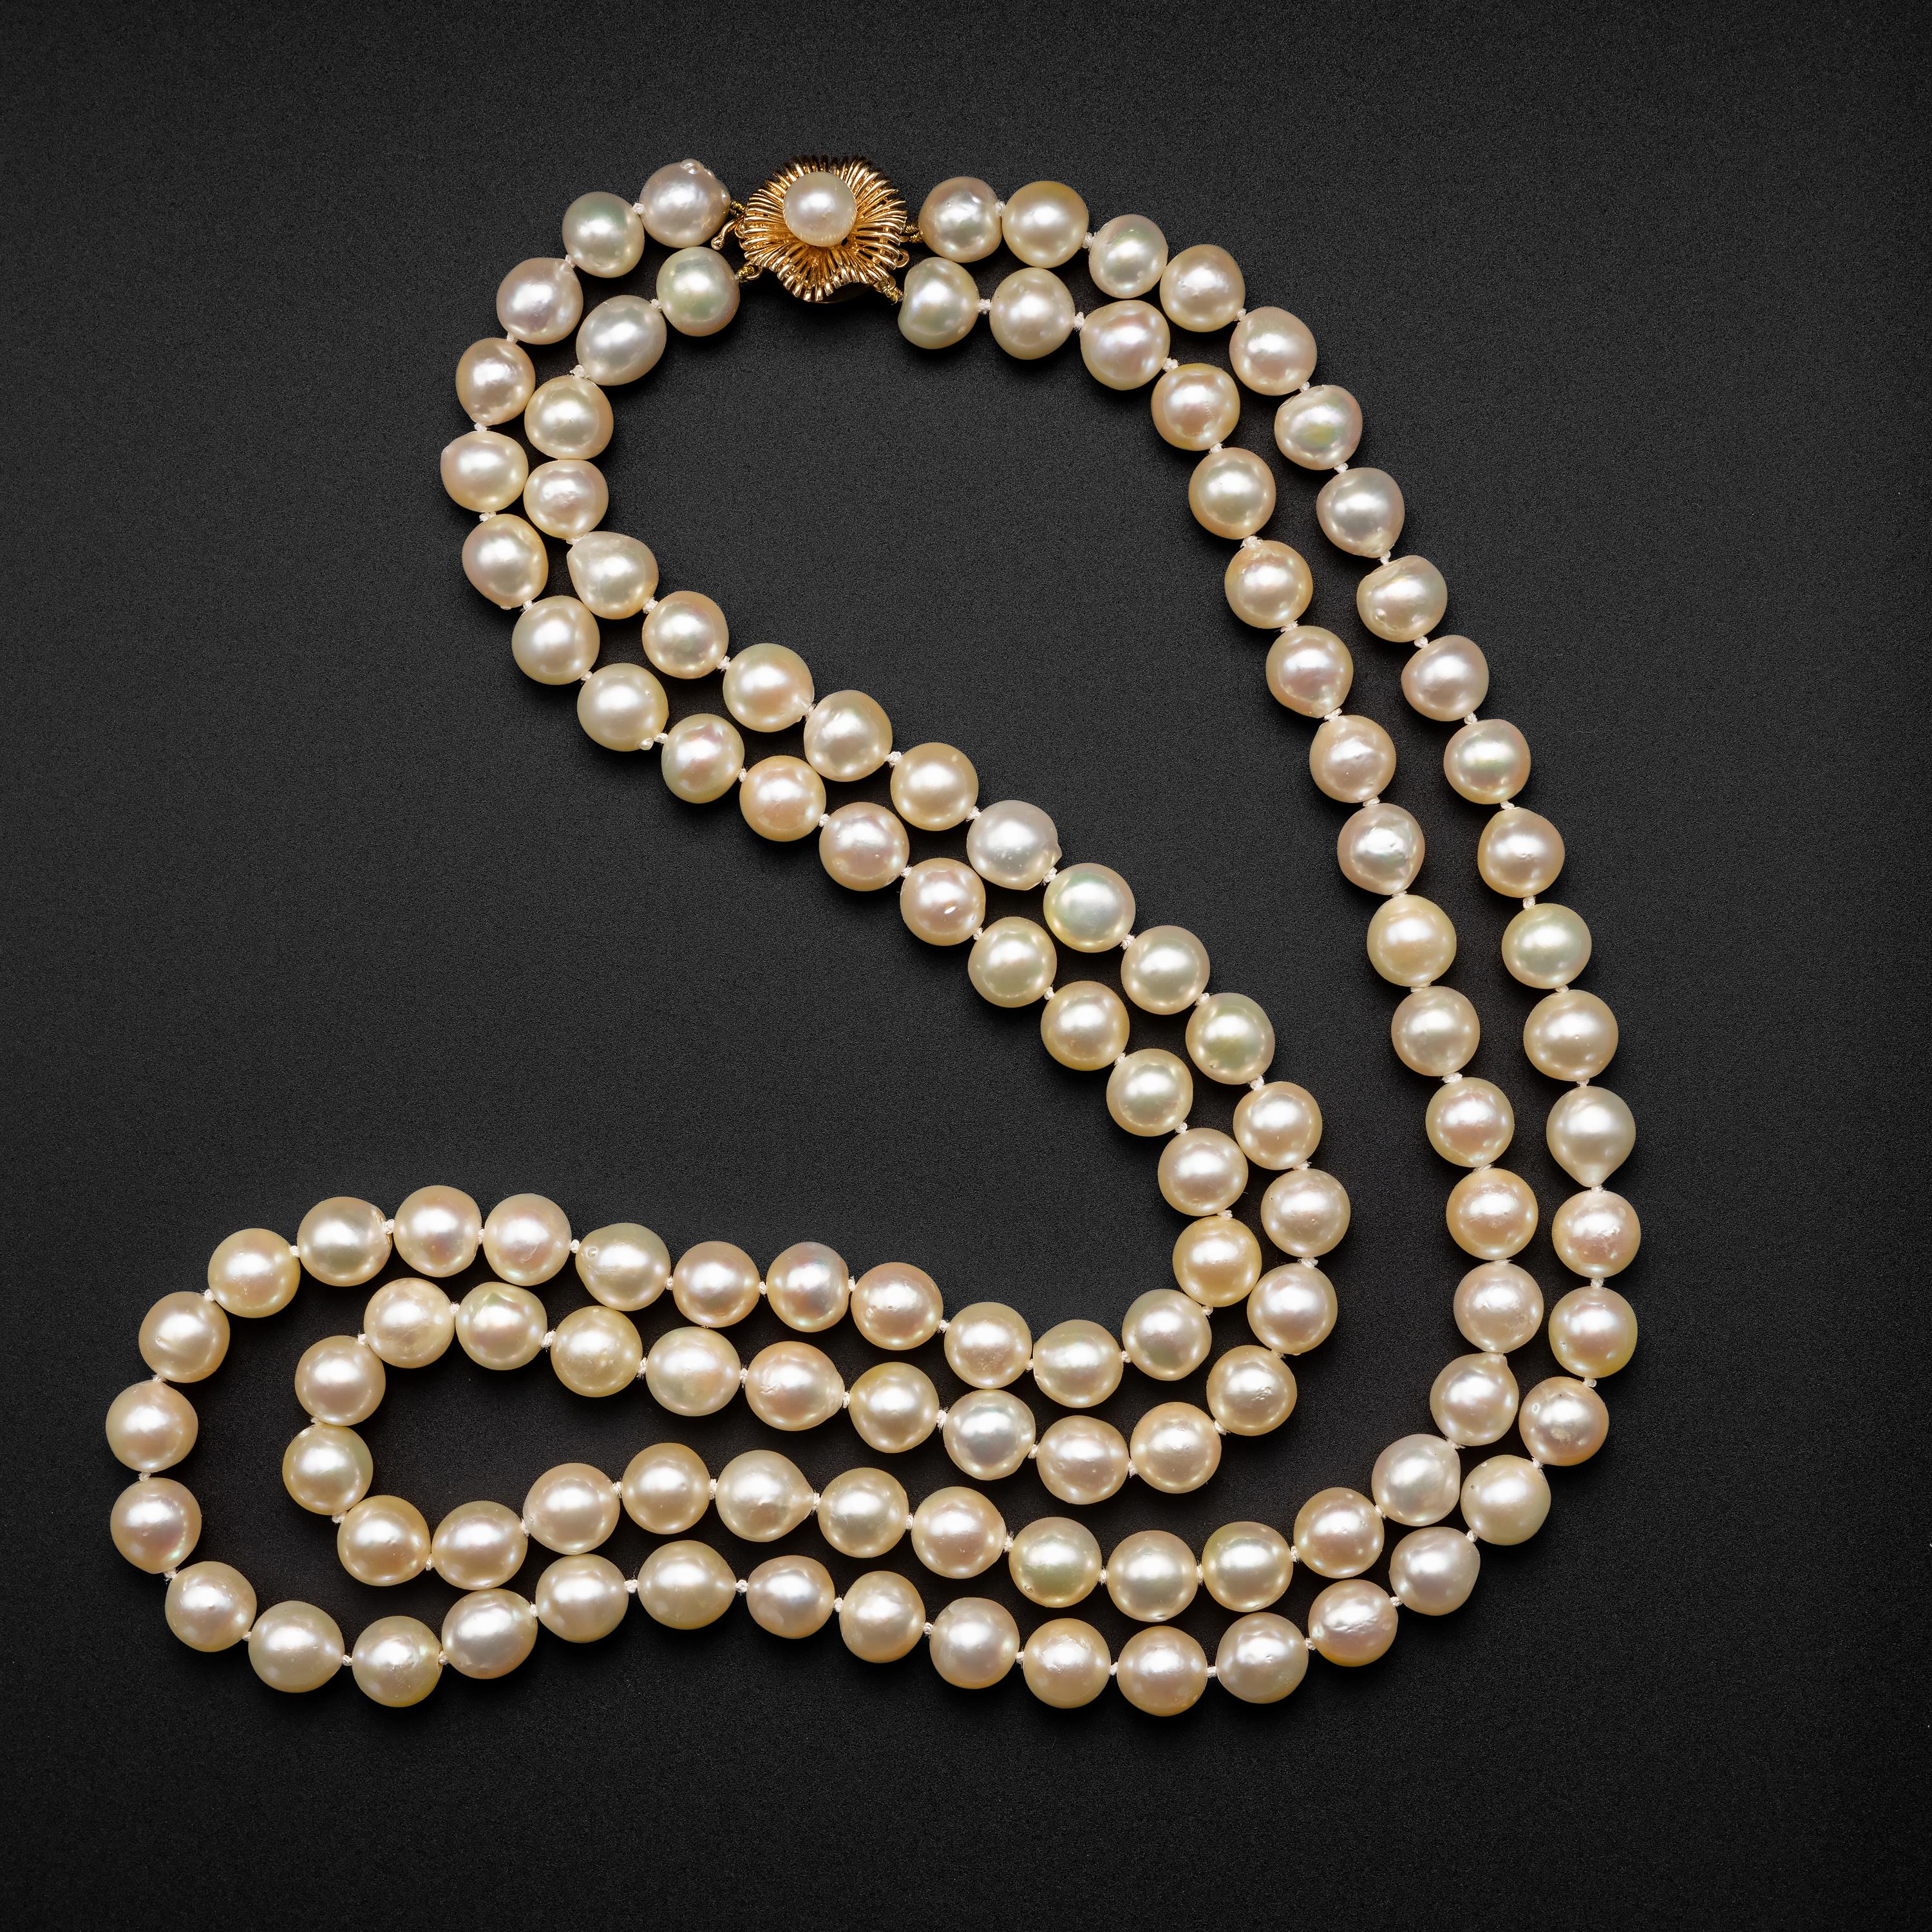 Spectacular in every way, this impossibly luxurious midcentury (circa 1970s) double-stand necklace is composed of 118 cultured Akoya pearls. The spectacular vintage pearls are huge —9.5 -10mm— and slightly off-round. They have high luster and